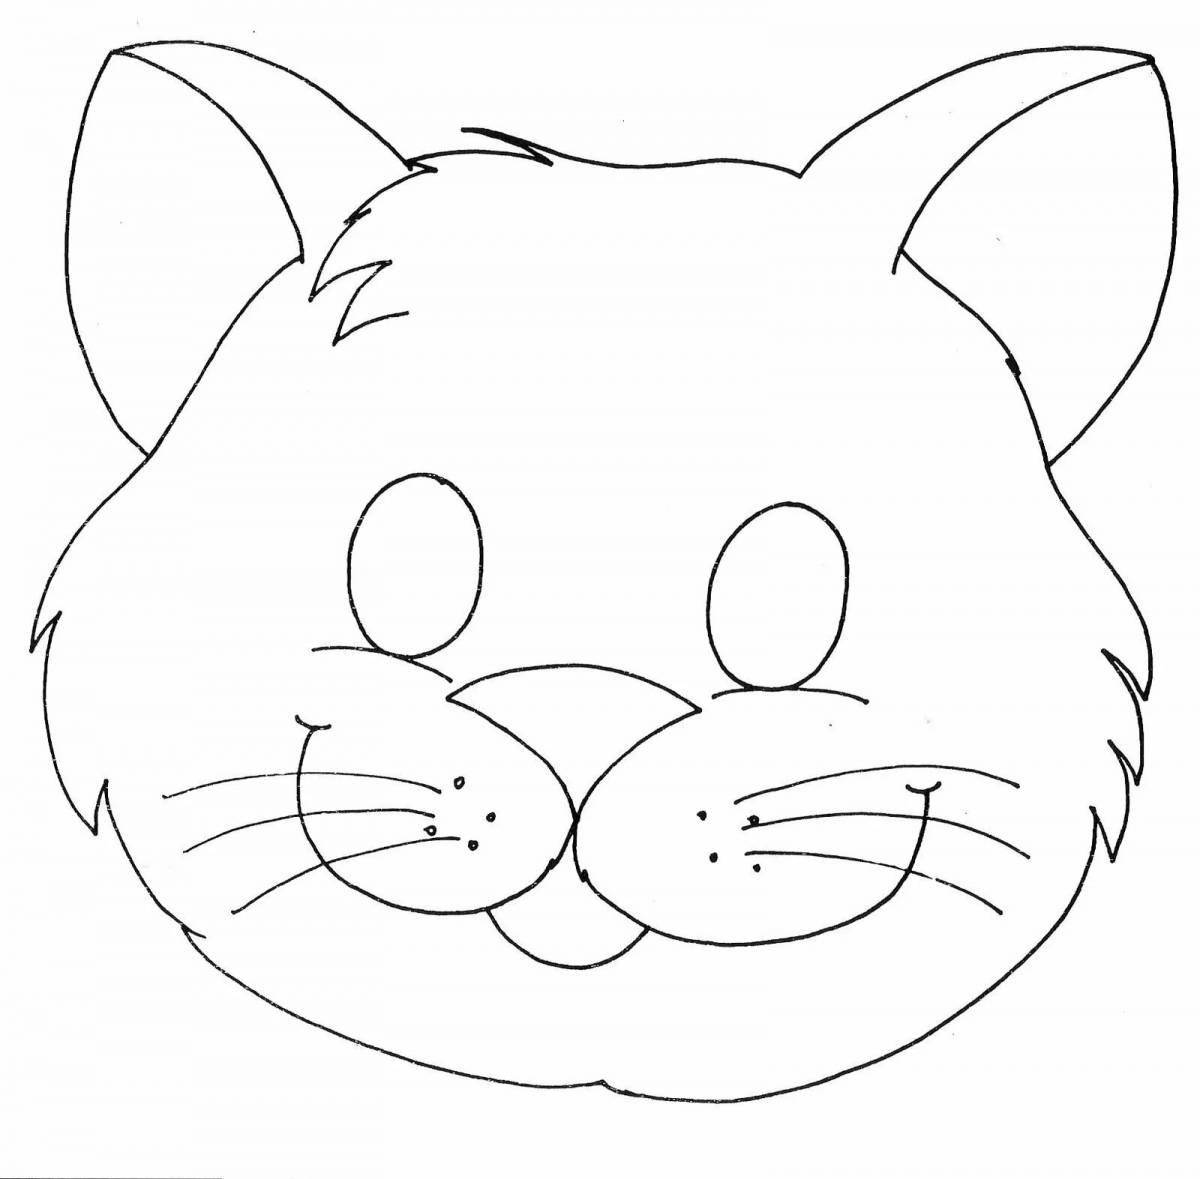 Fairy cat mask coloring page